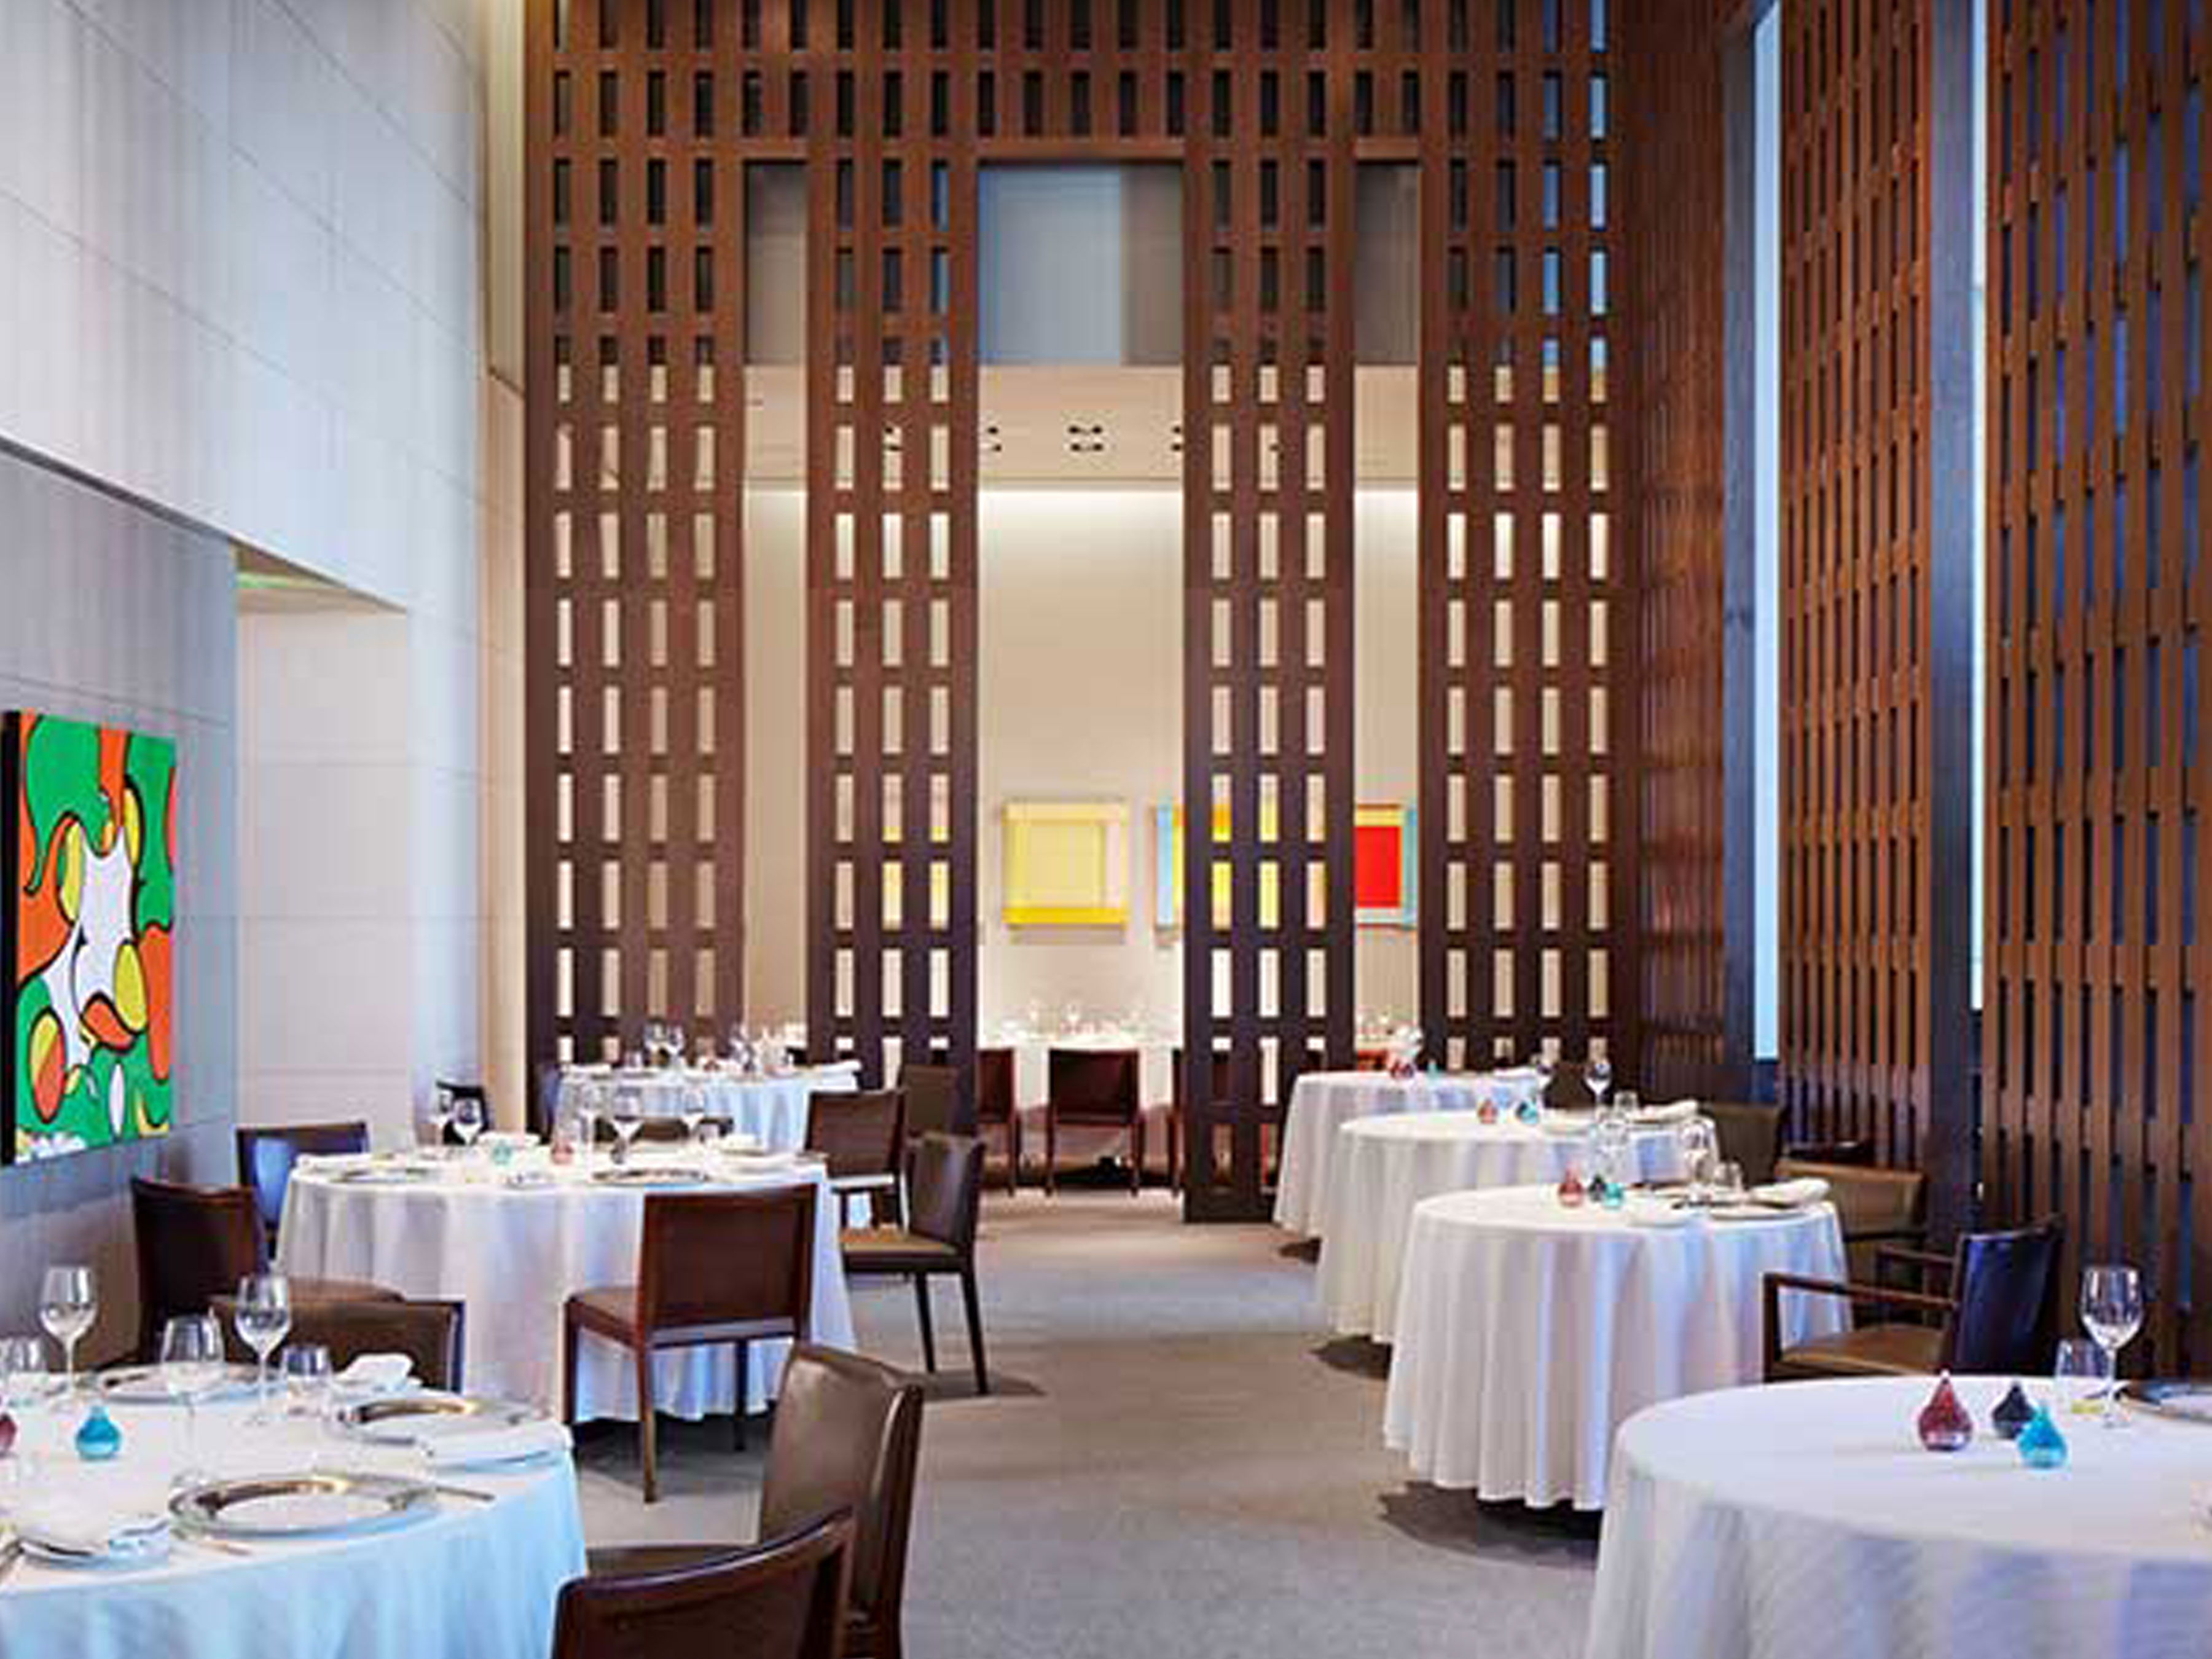 Photograph of the interior of an upscale rstaurant